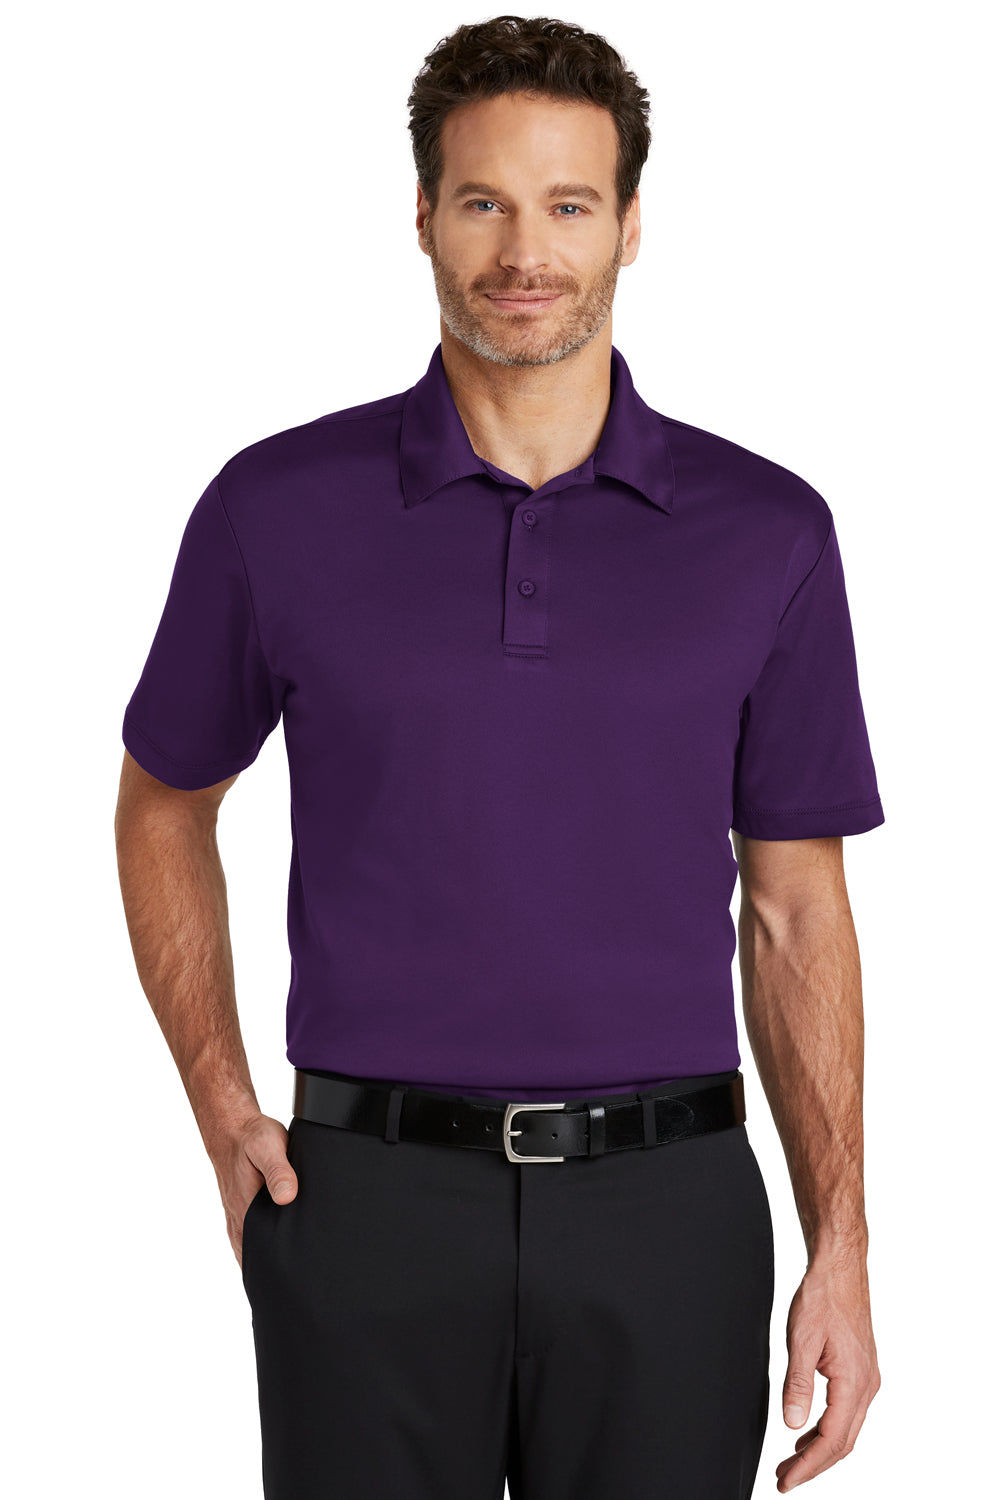 Port Authority K540 Mens Silk Touch Performance Moisture Wicking Short Sleeve Polo Shirt Purple Front